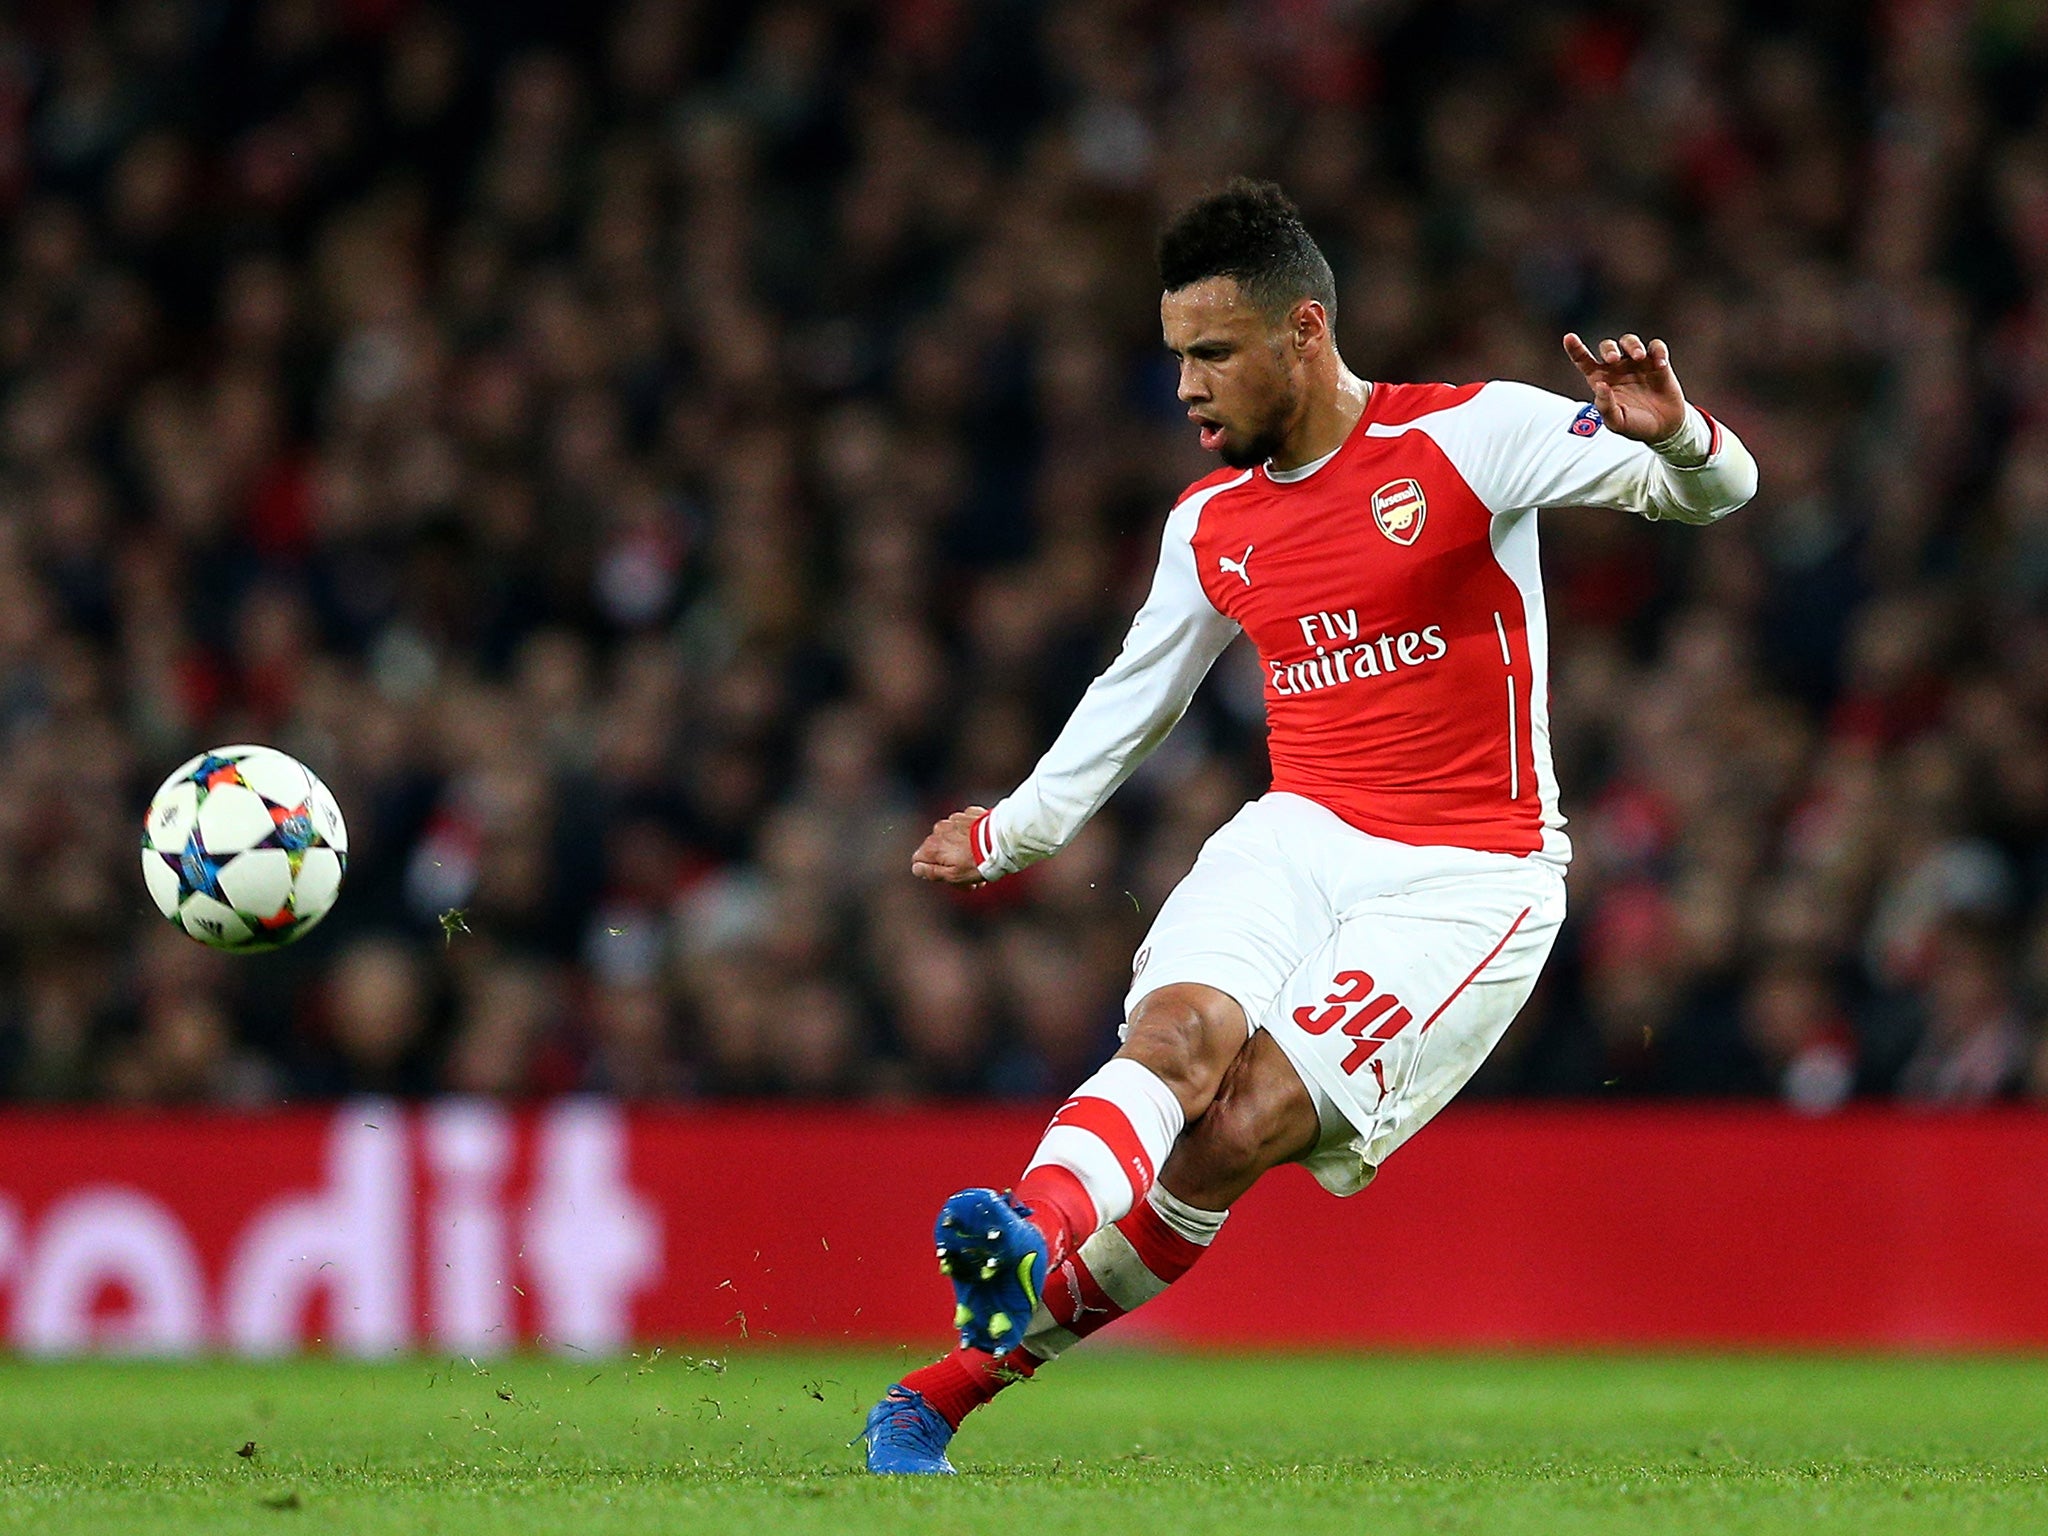 Coquelin has impressed for Arsenal since securing a first-team place